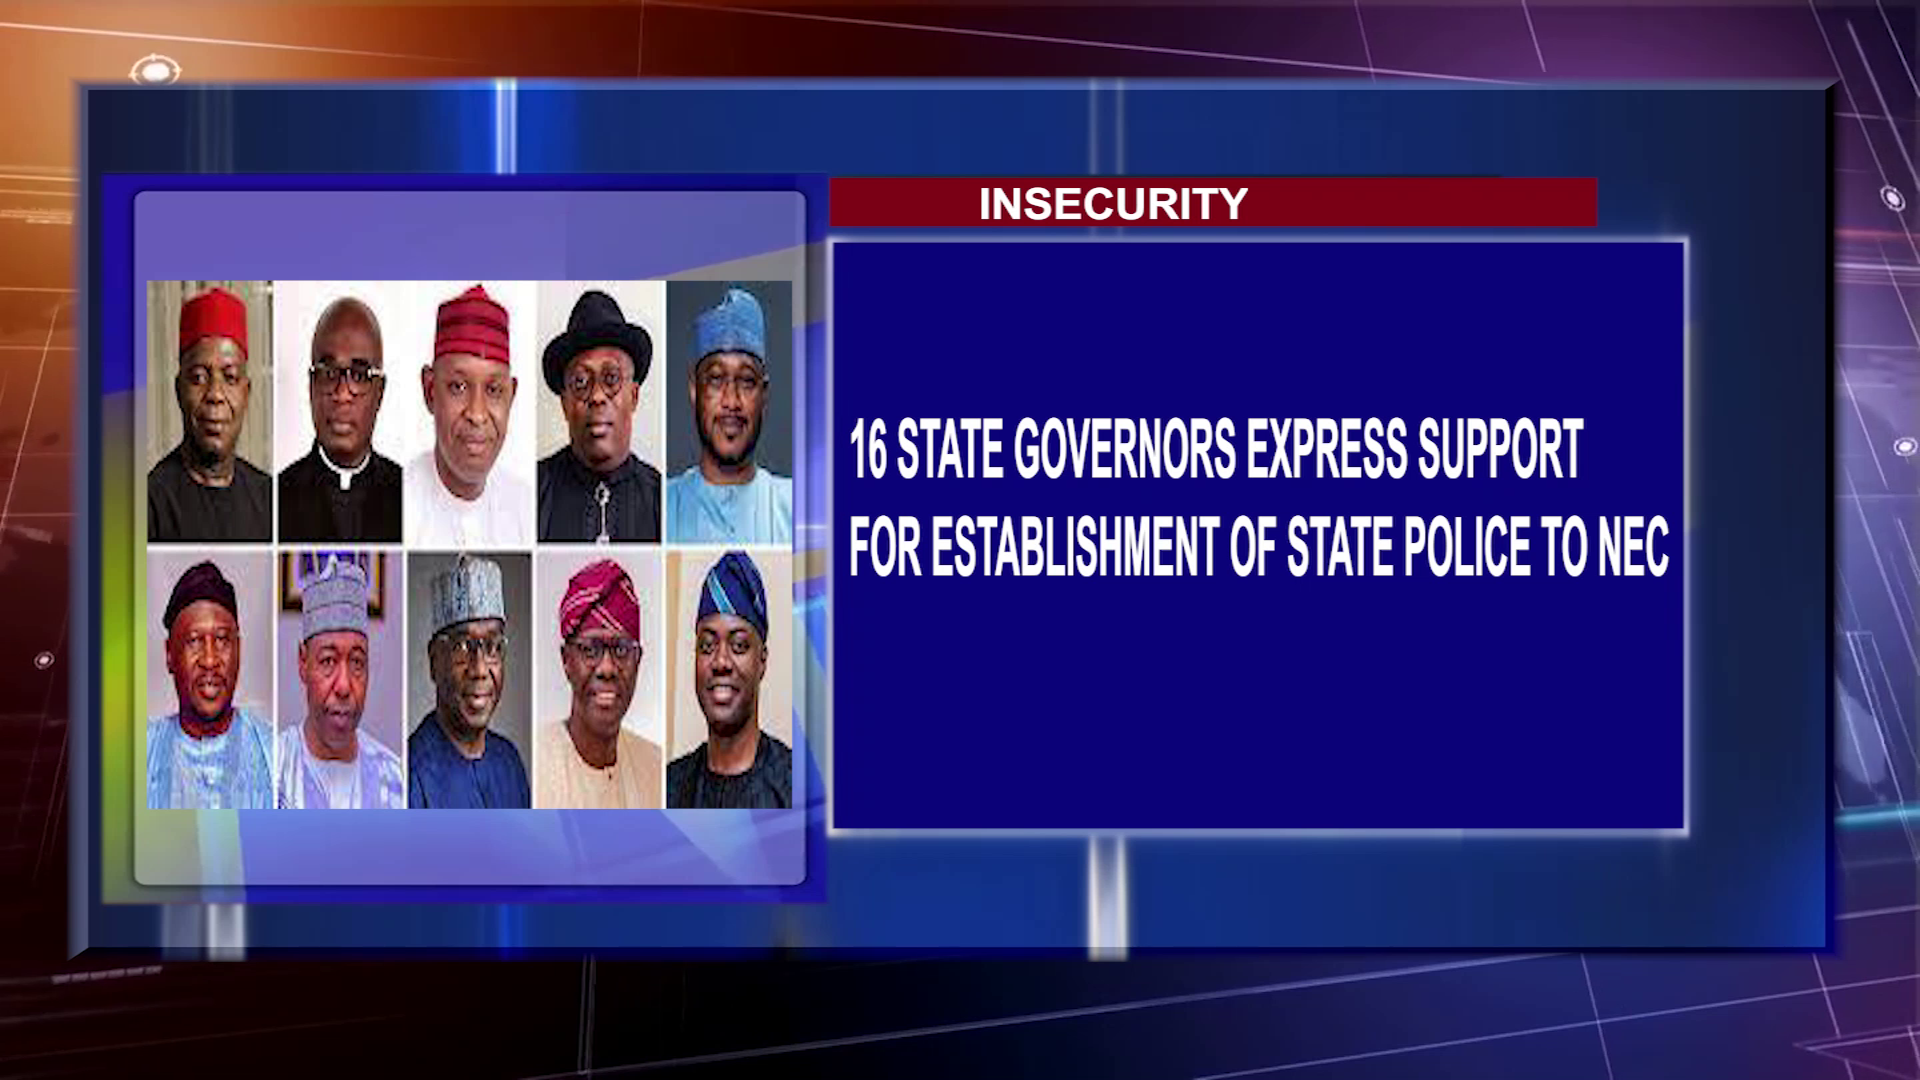 16 State Governors Express Support For Establishment Of State Police To NEC